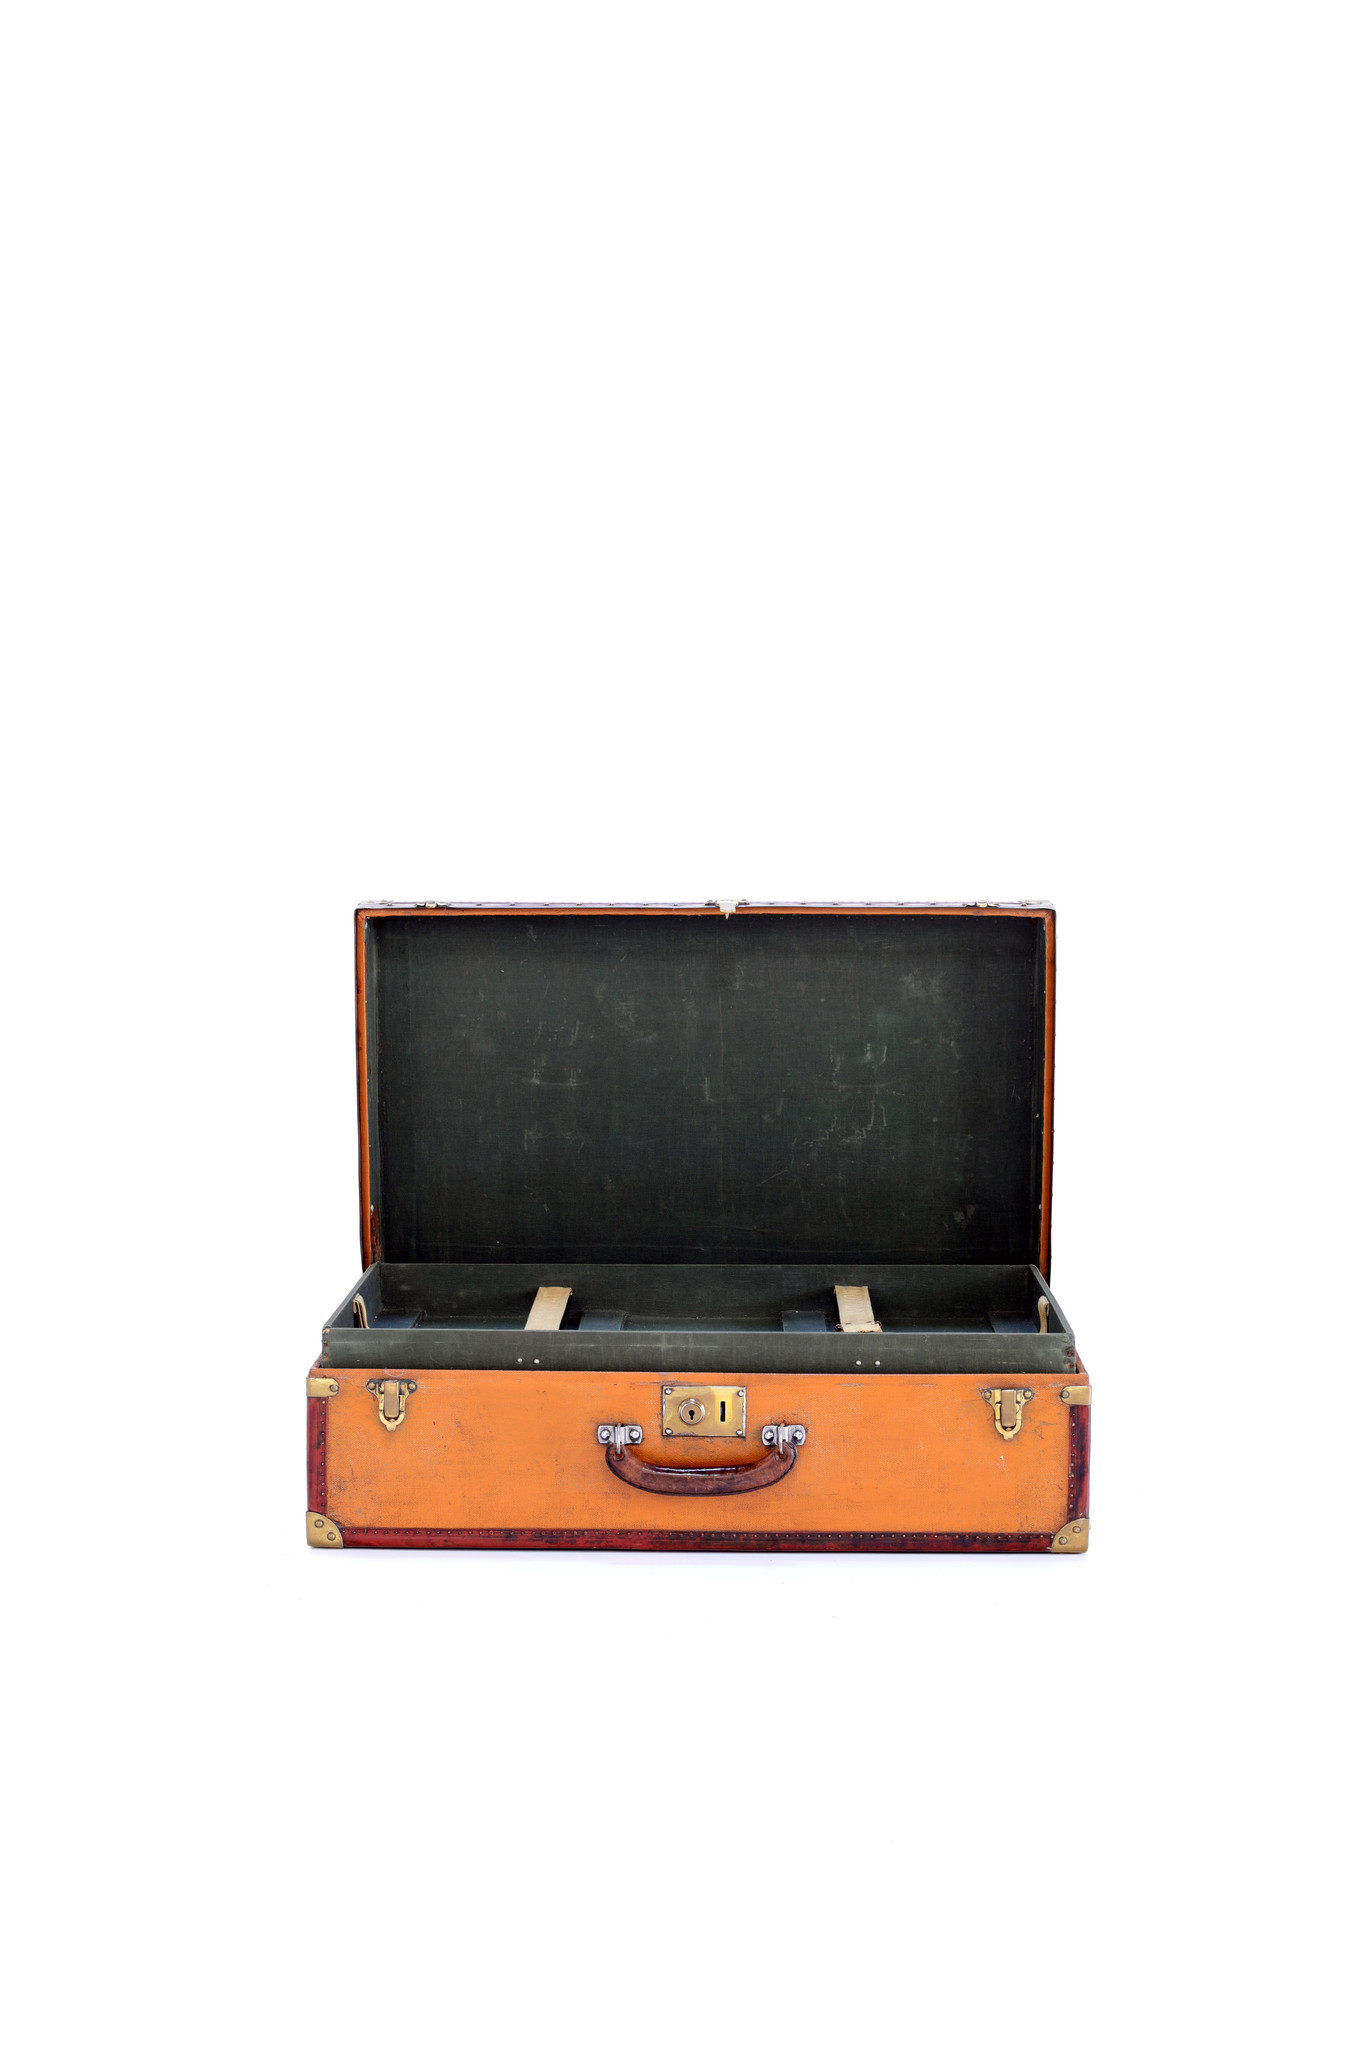 Moynat suitcase, 1920 - THE HOUSE OF WAUW